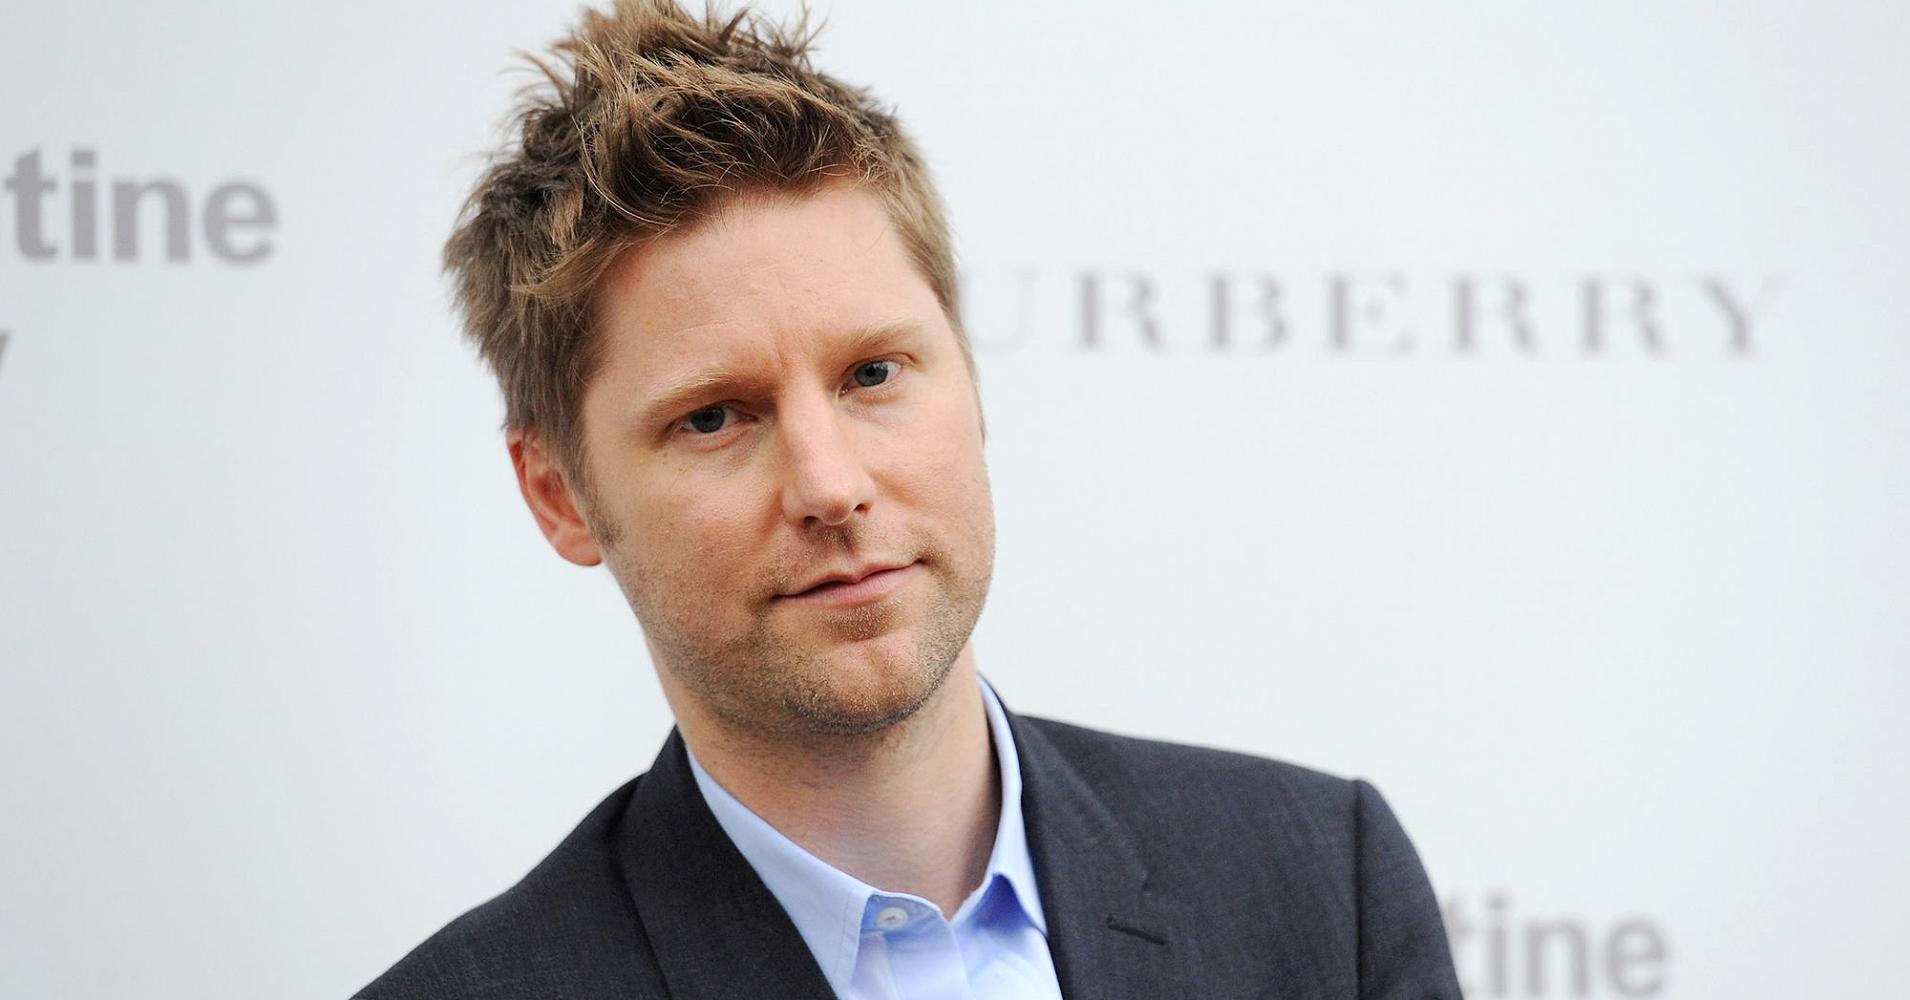 Christopher Bailey Set to Depart From Burberry